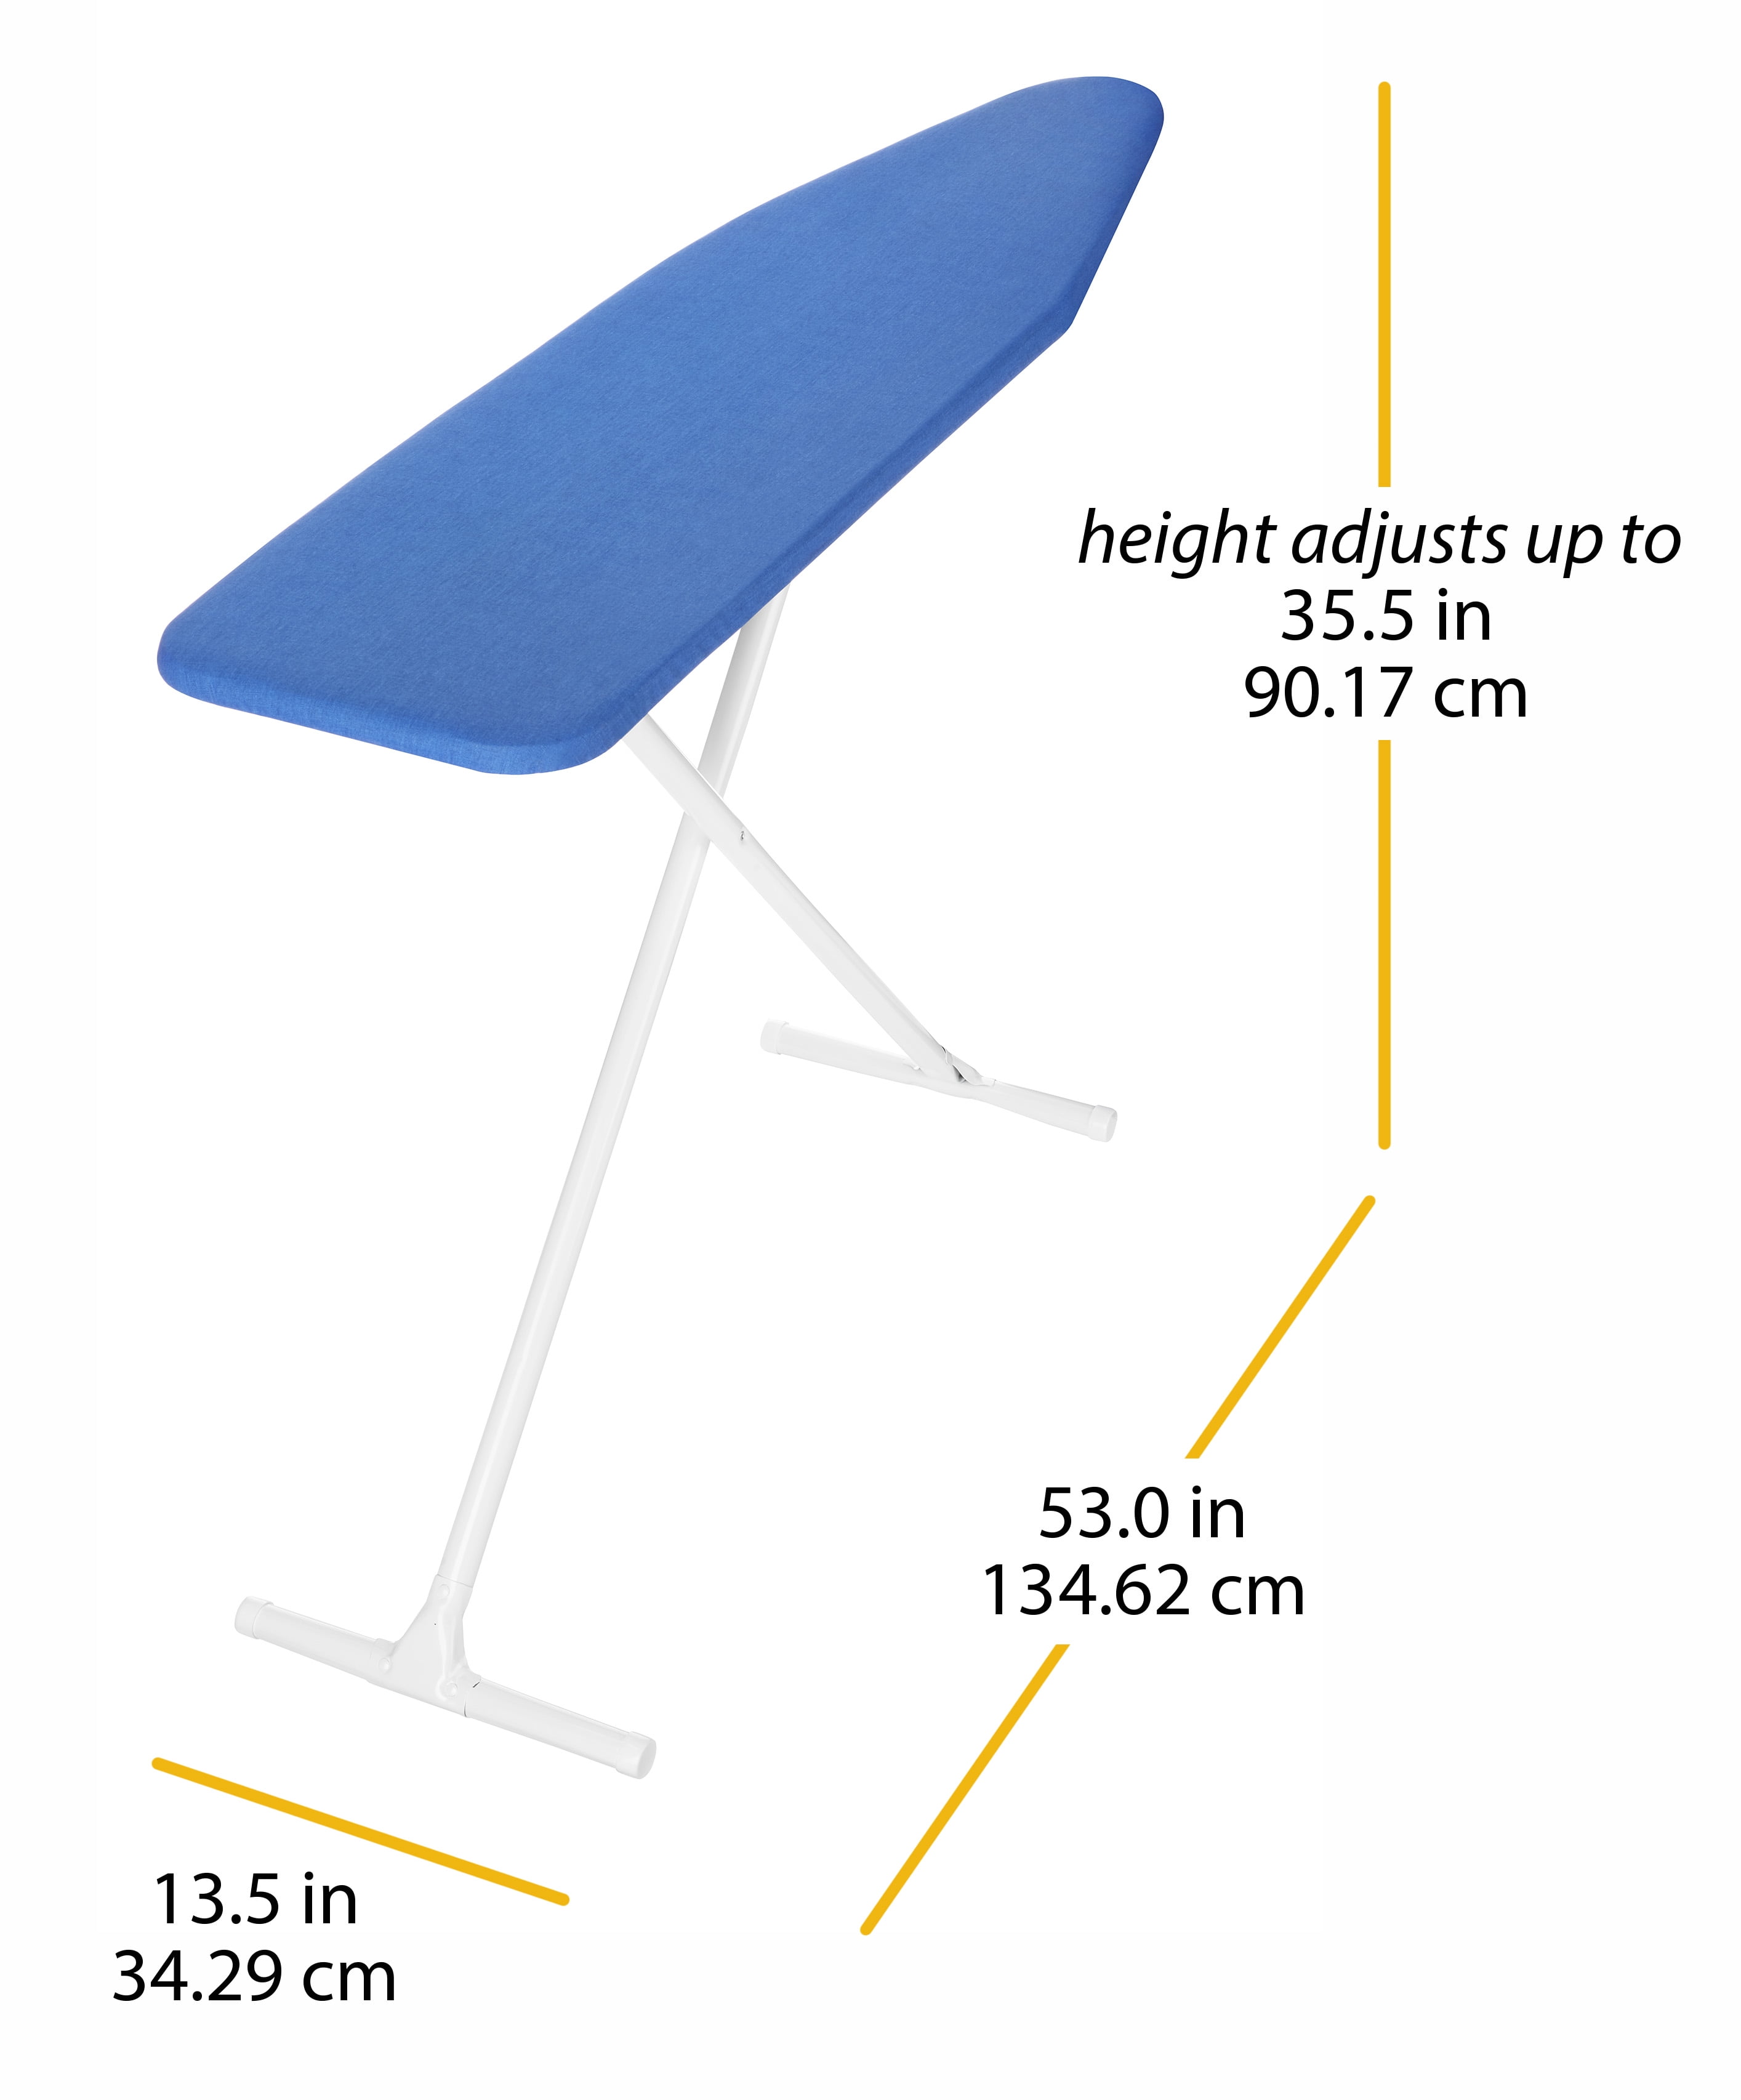 Whitmor T-Leg Ironing Board with Cover & Pad